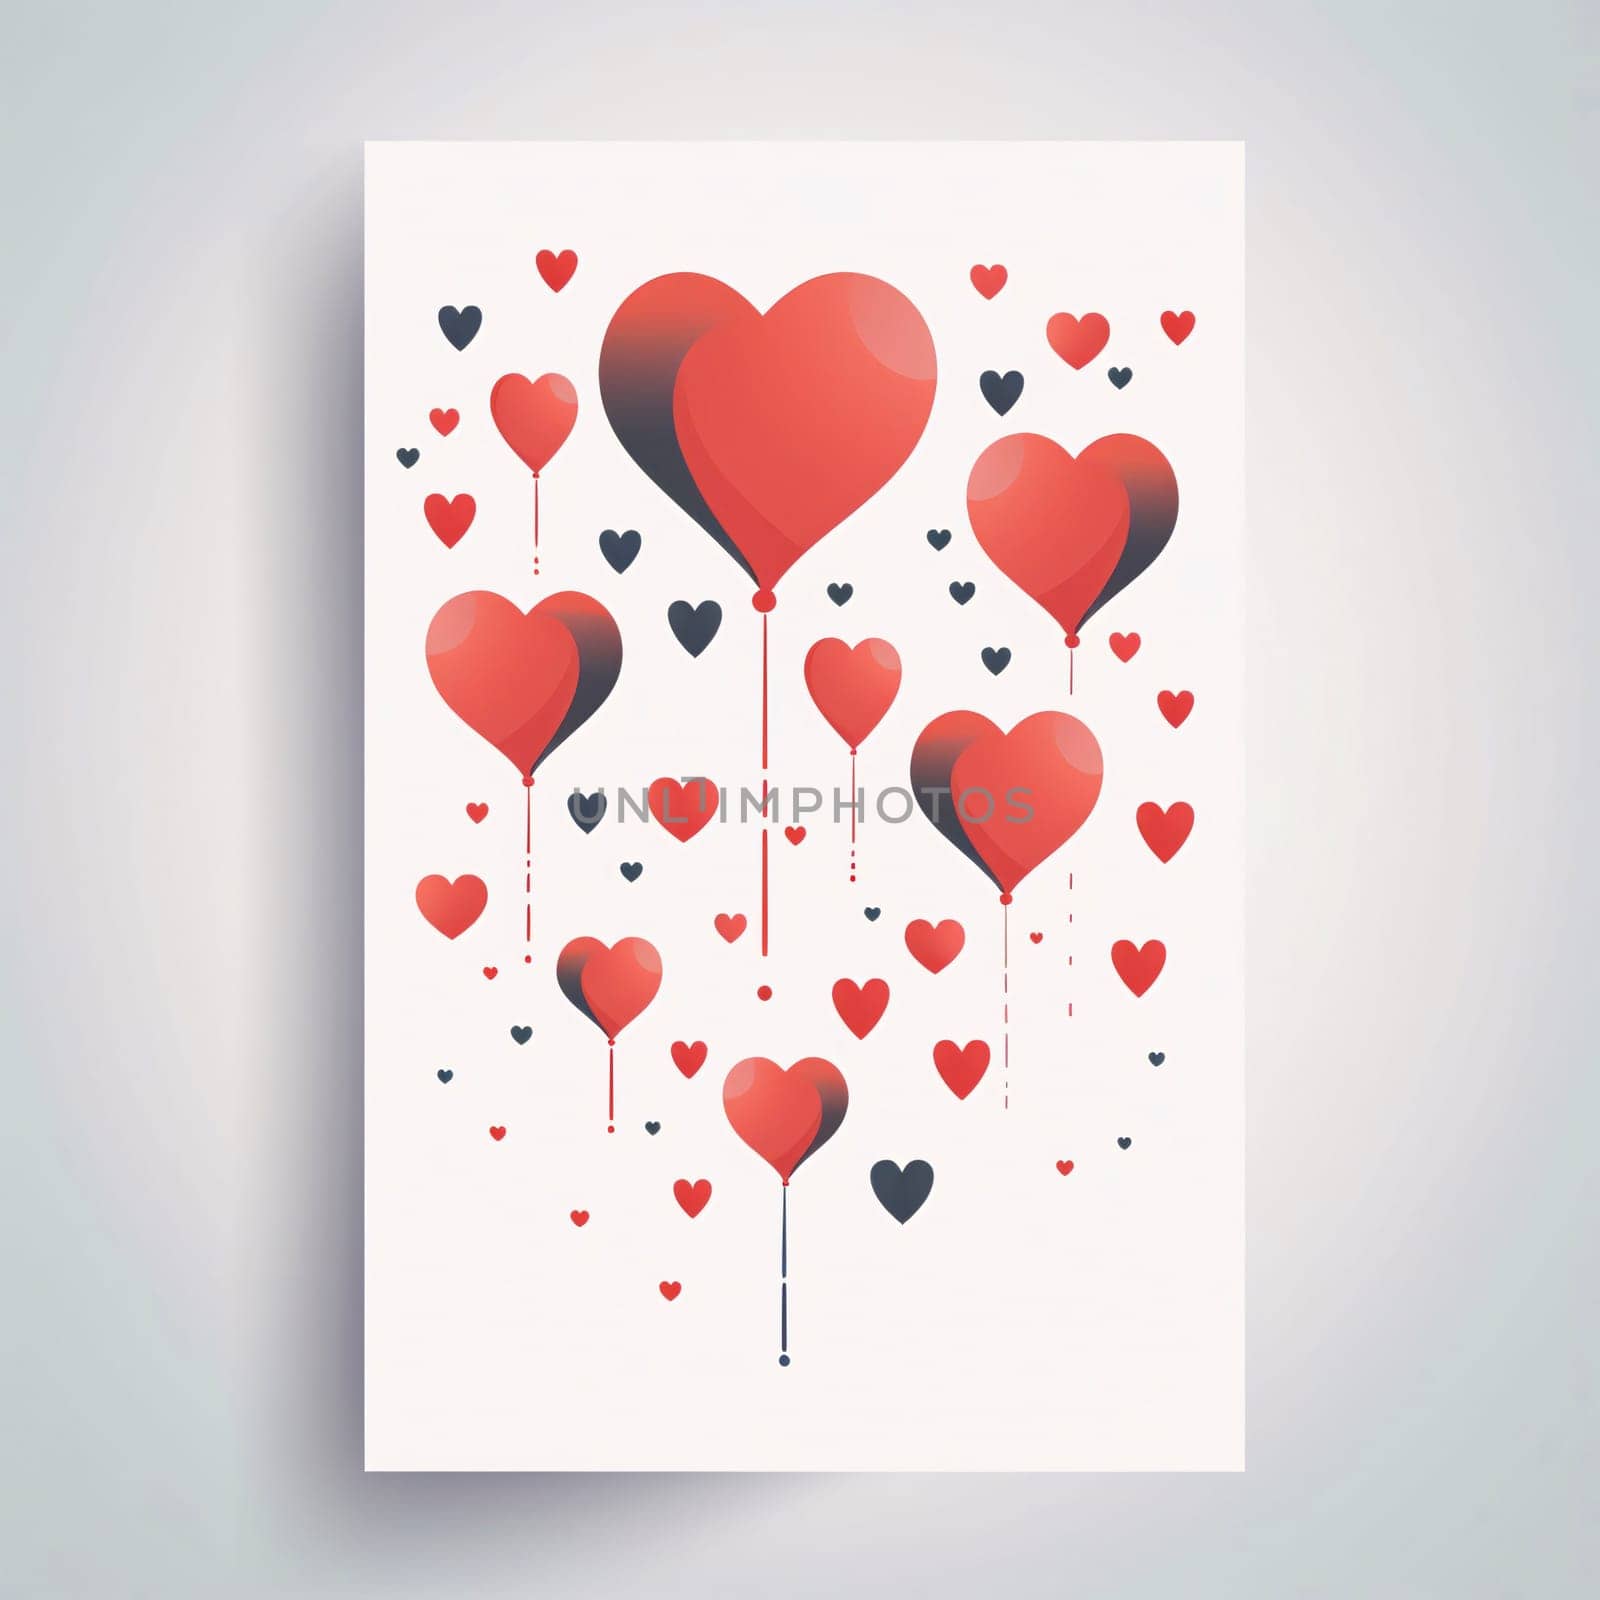 White Valentine's Day card with red hearts as a balloon. Valentine's Day as a day symbol of affection and love. A time of falling in love and love.